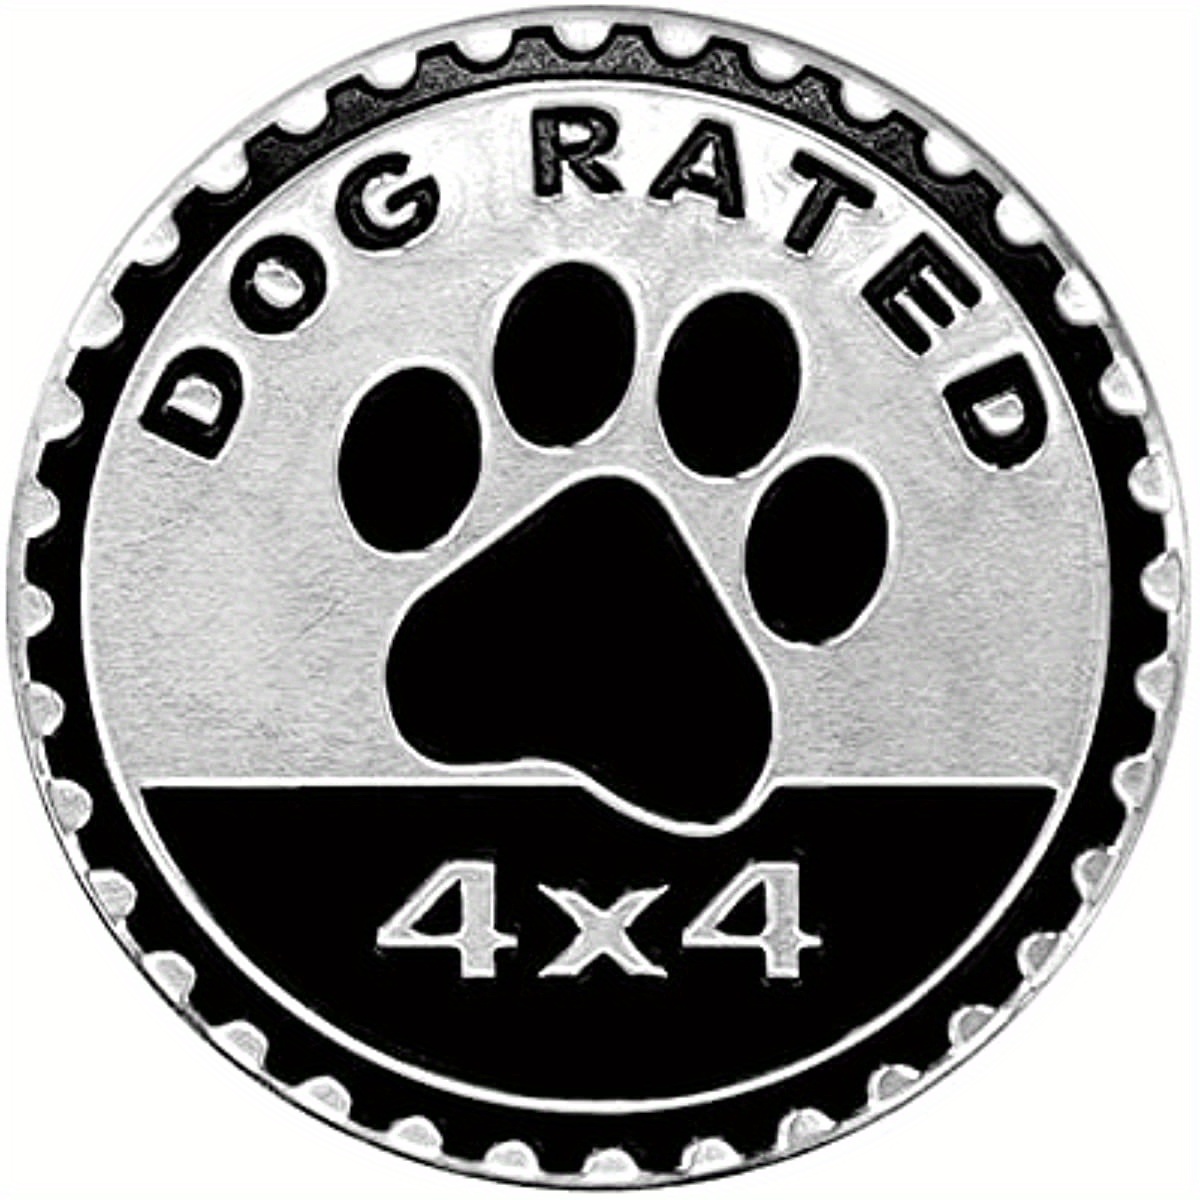 

1pc 4x4 Rated Automotive 3d Metal Car Badge Emblem - Add Style To Your Car, Truck, Or Suv